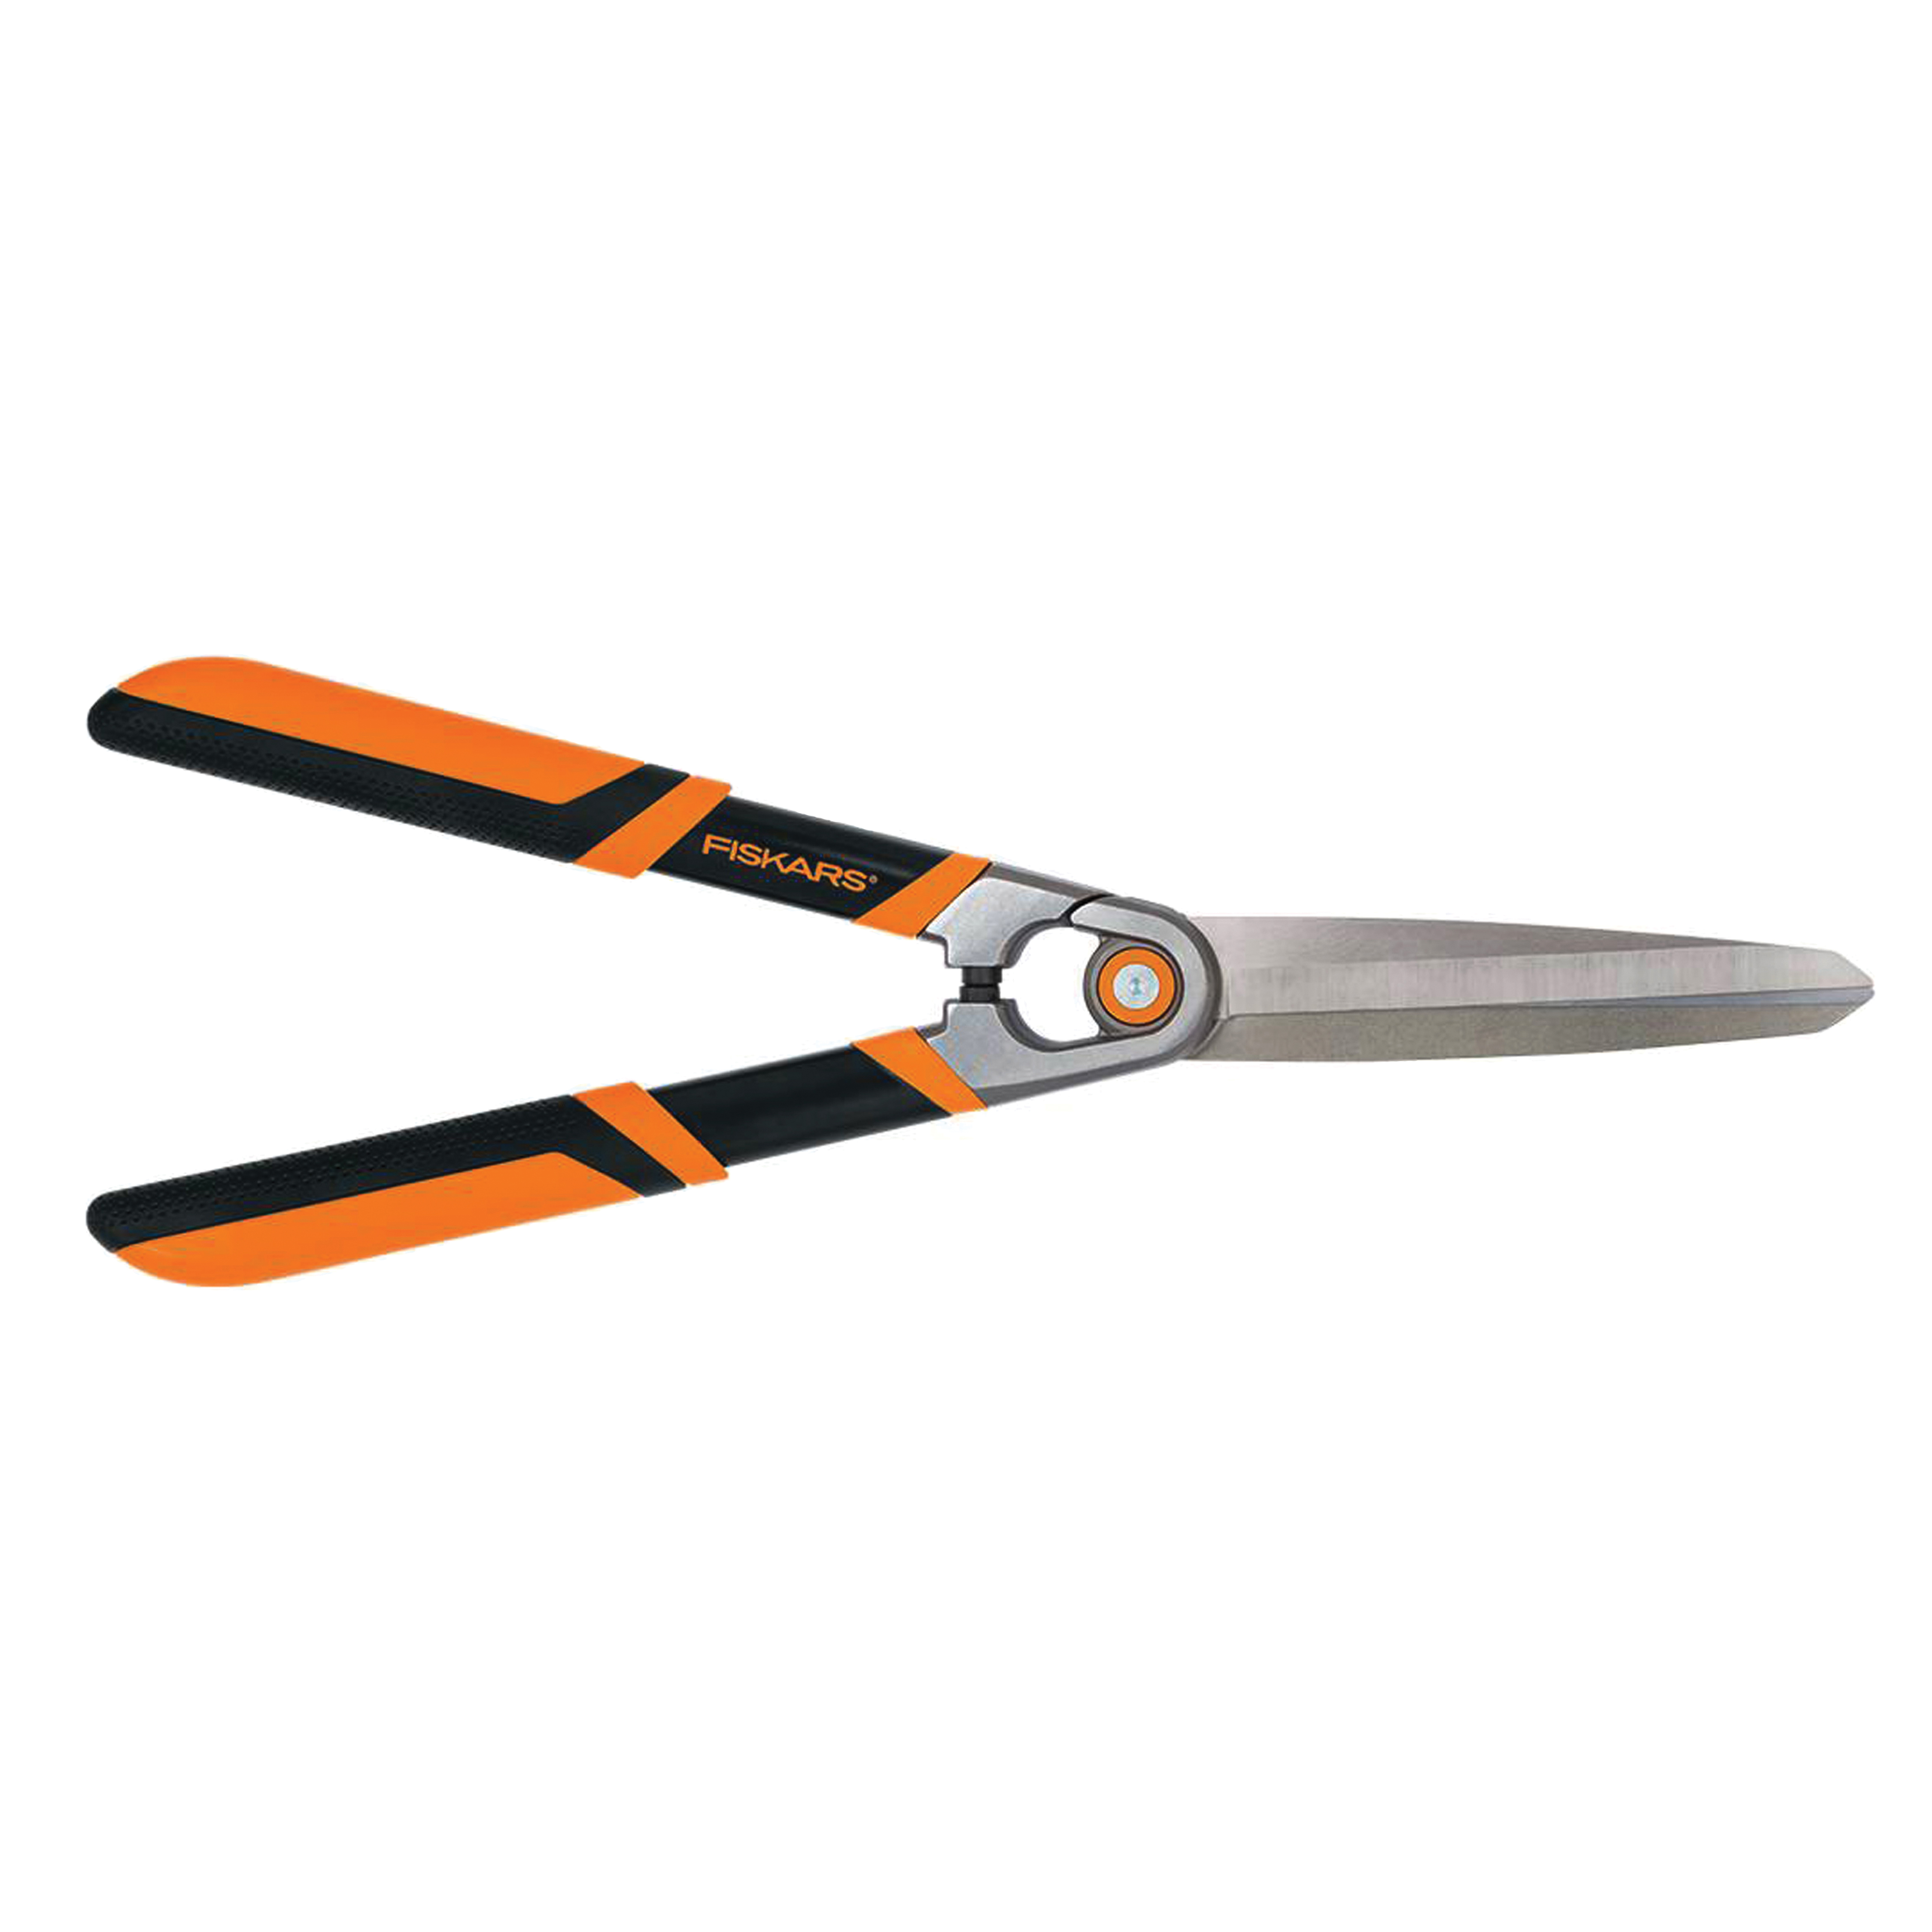 391761-1001 Hedge Shear with Replaceable Blade, 9 in L Blade, Steel Blade, Steel Handle, Soft-Grip Handle